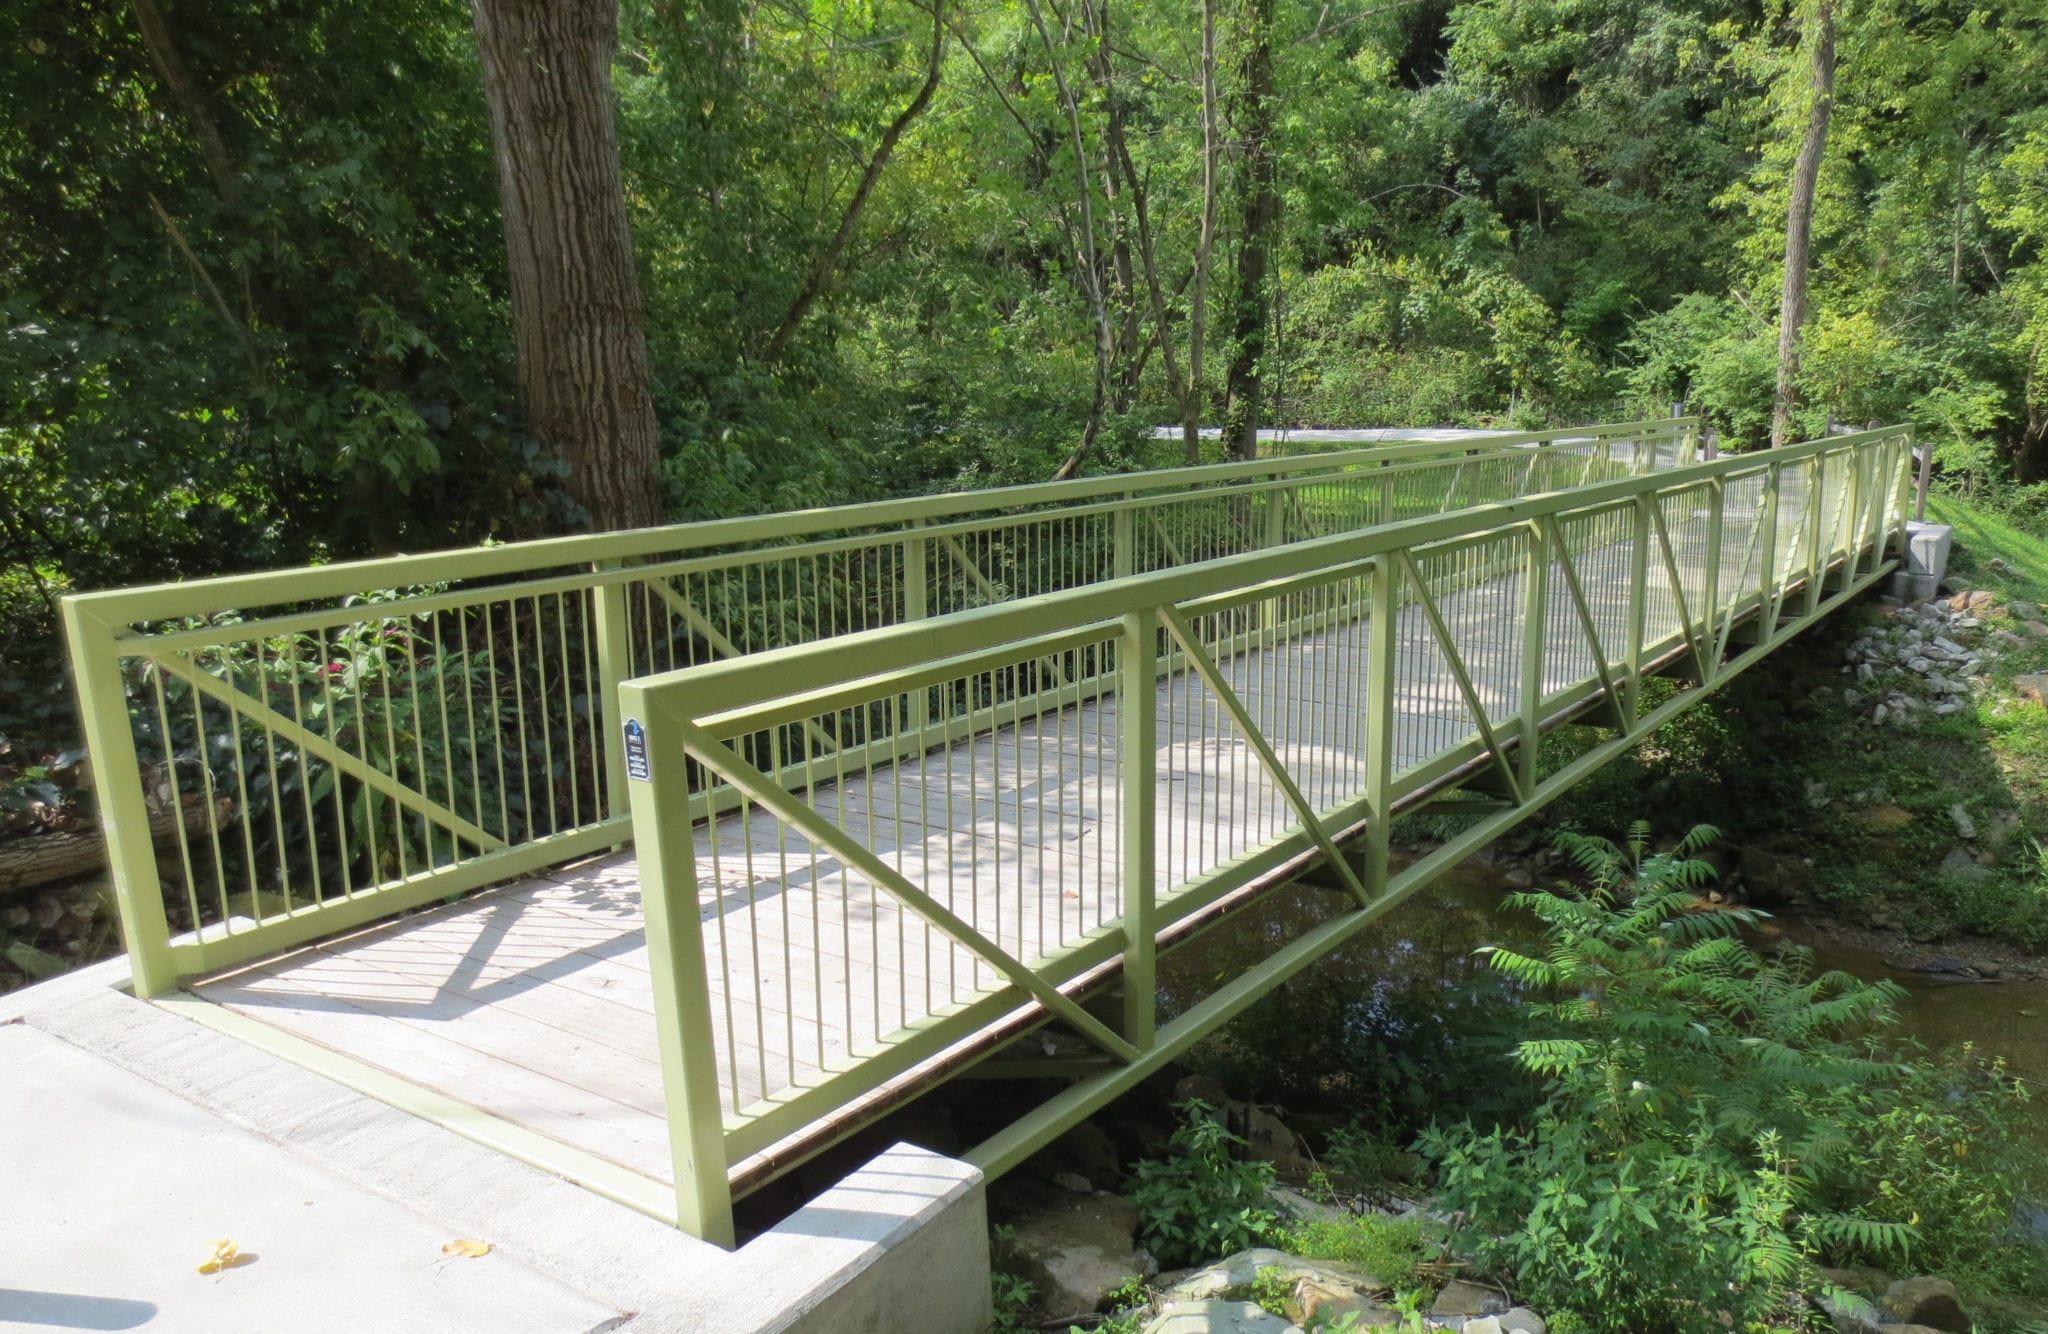 Green painted hiking trail bridge design in forest setting